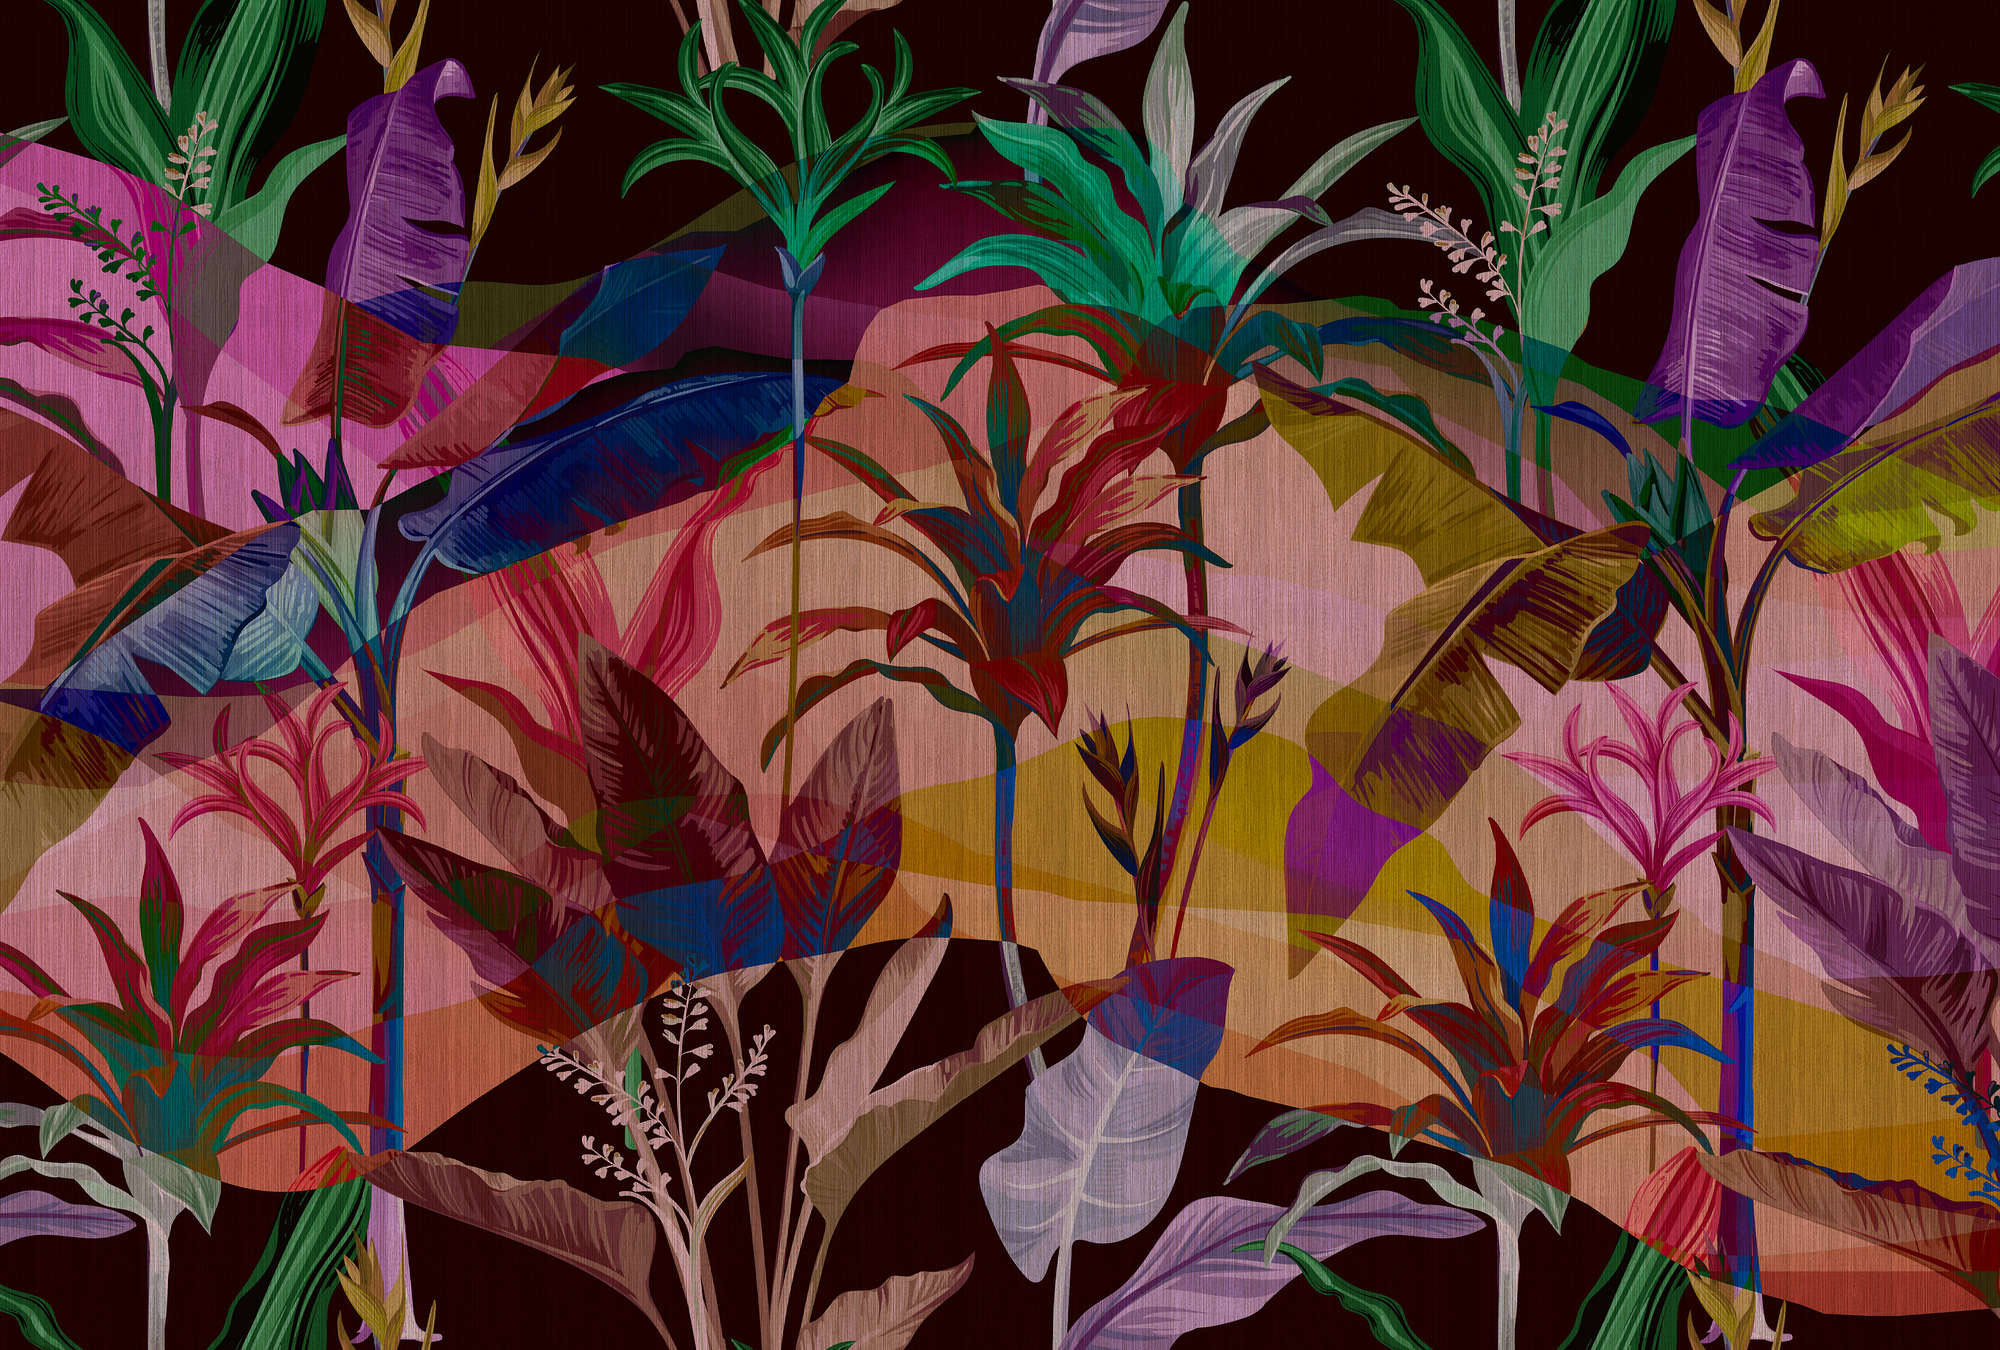             Palmyra 1 - jungle mural colourful & abstract leaves
        